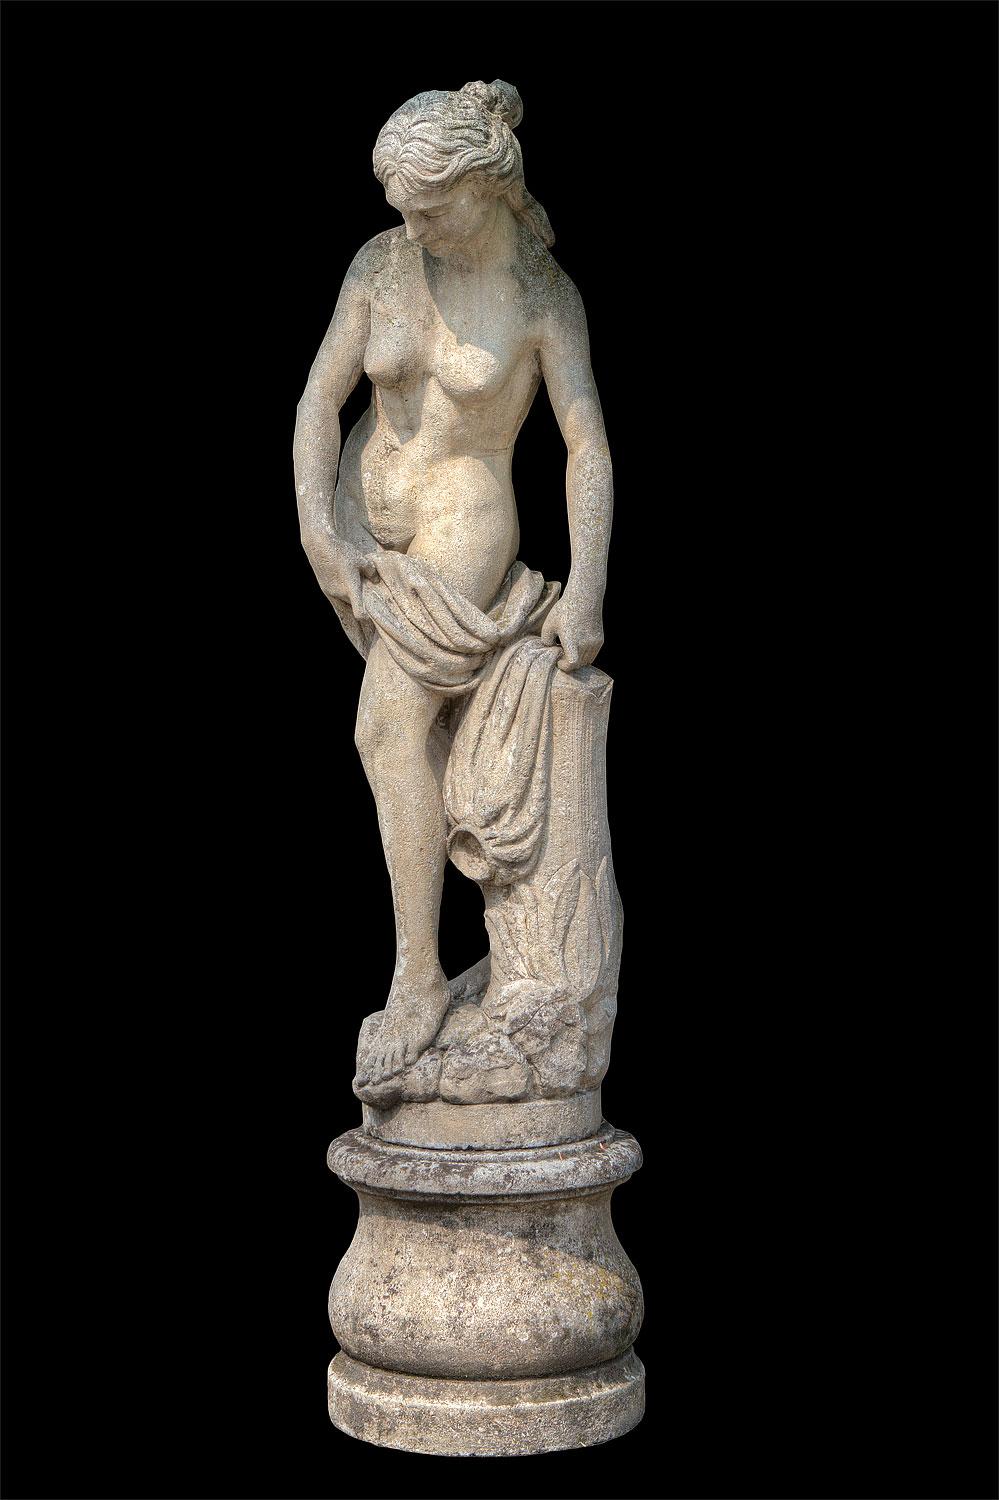 Elegant nude figure of Venus representing the goddess of beauty.
Timeless decoration for your garden or interior.
Provenience from a Venetian Estate.
Size: Base
Height 47cm, diameter 55cm.
Sculpture:
H 165 cm.
Totale
H 212 cm.